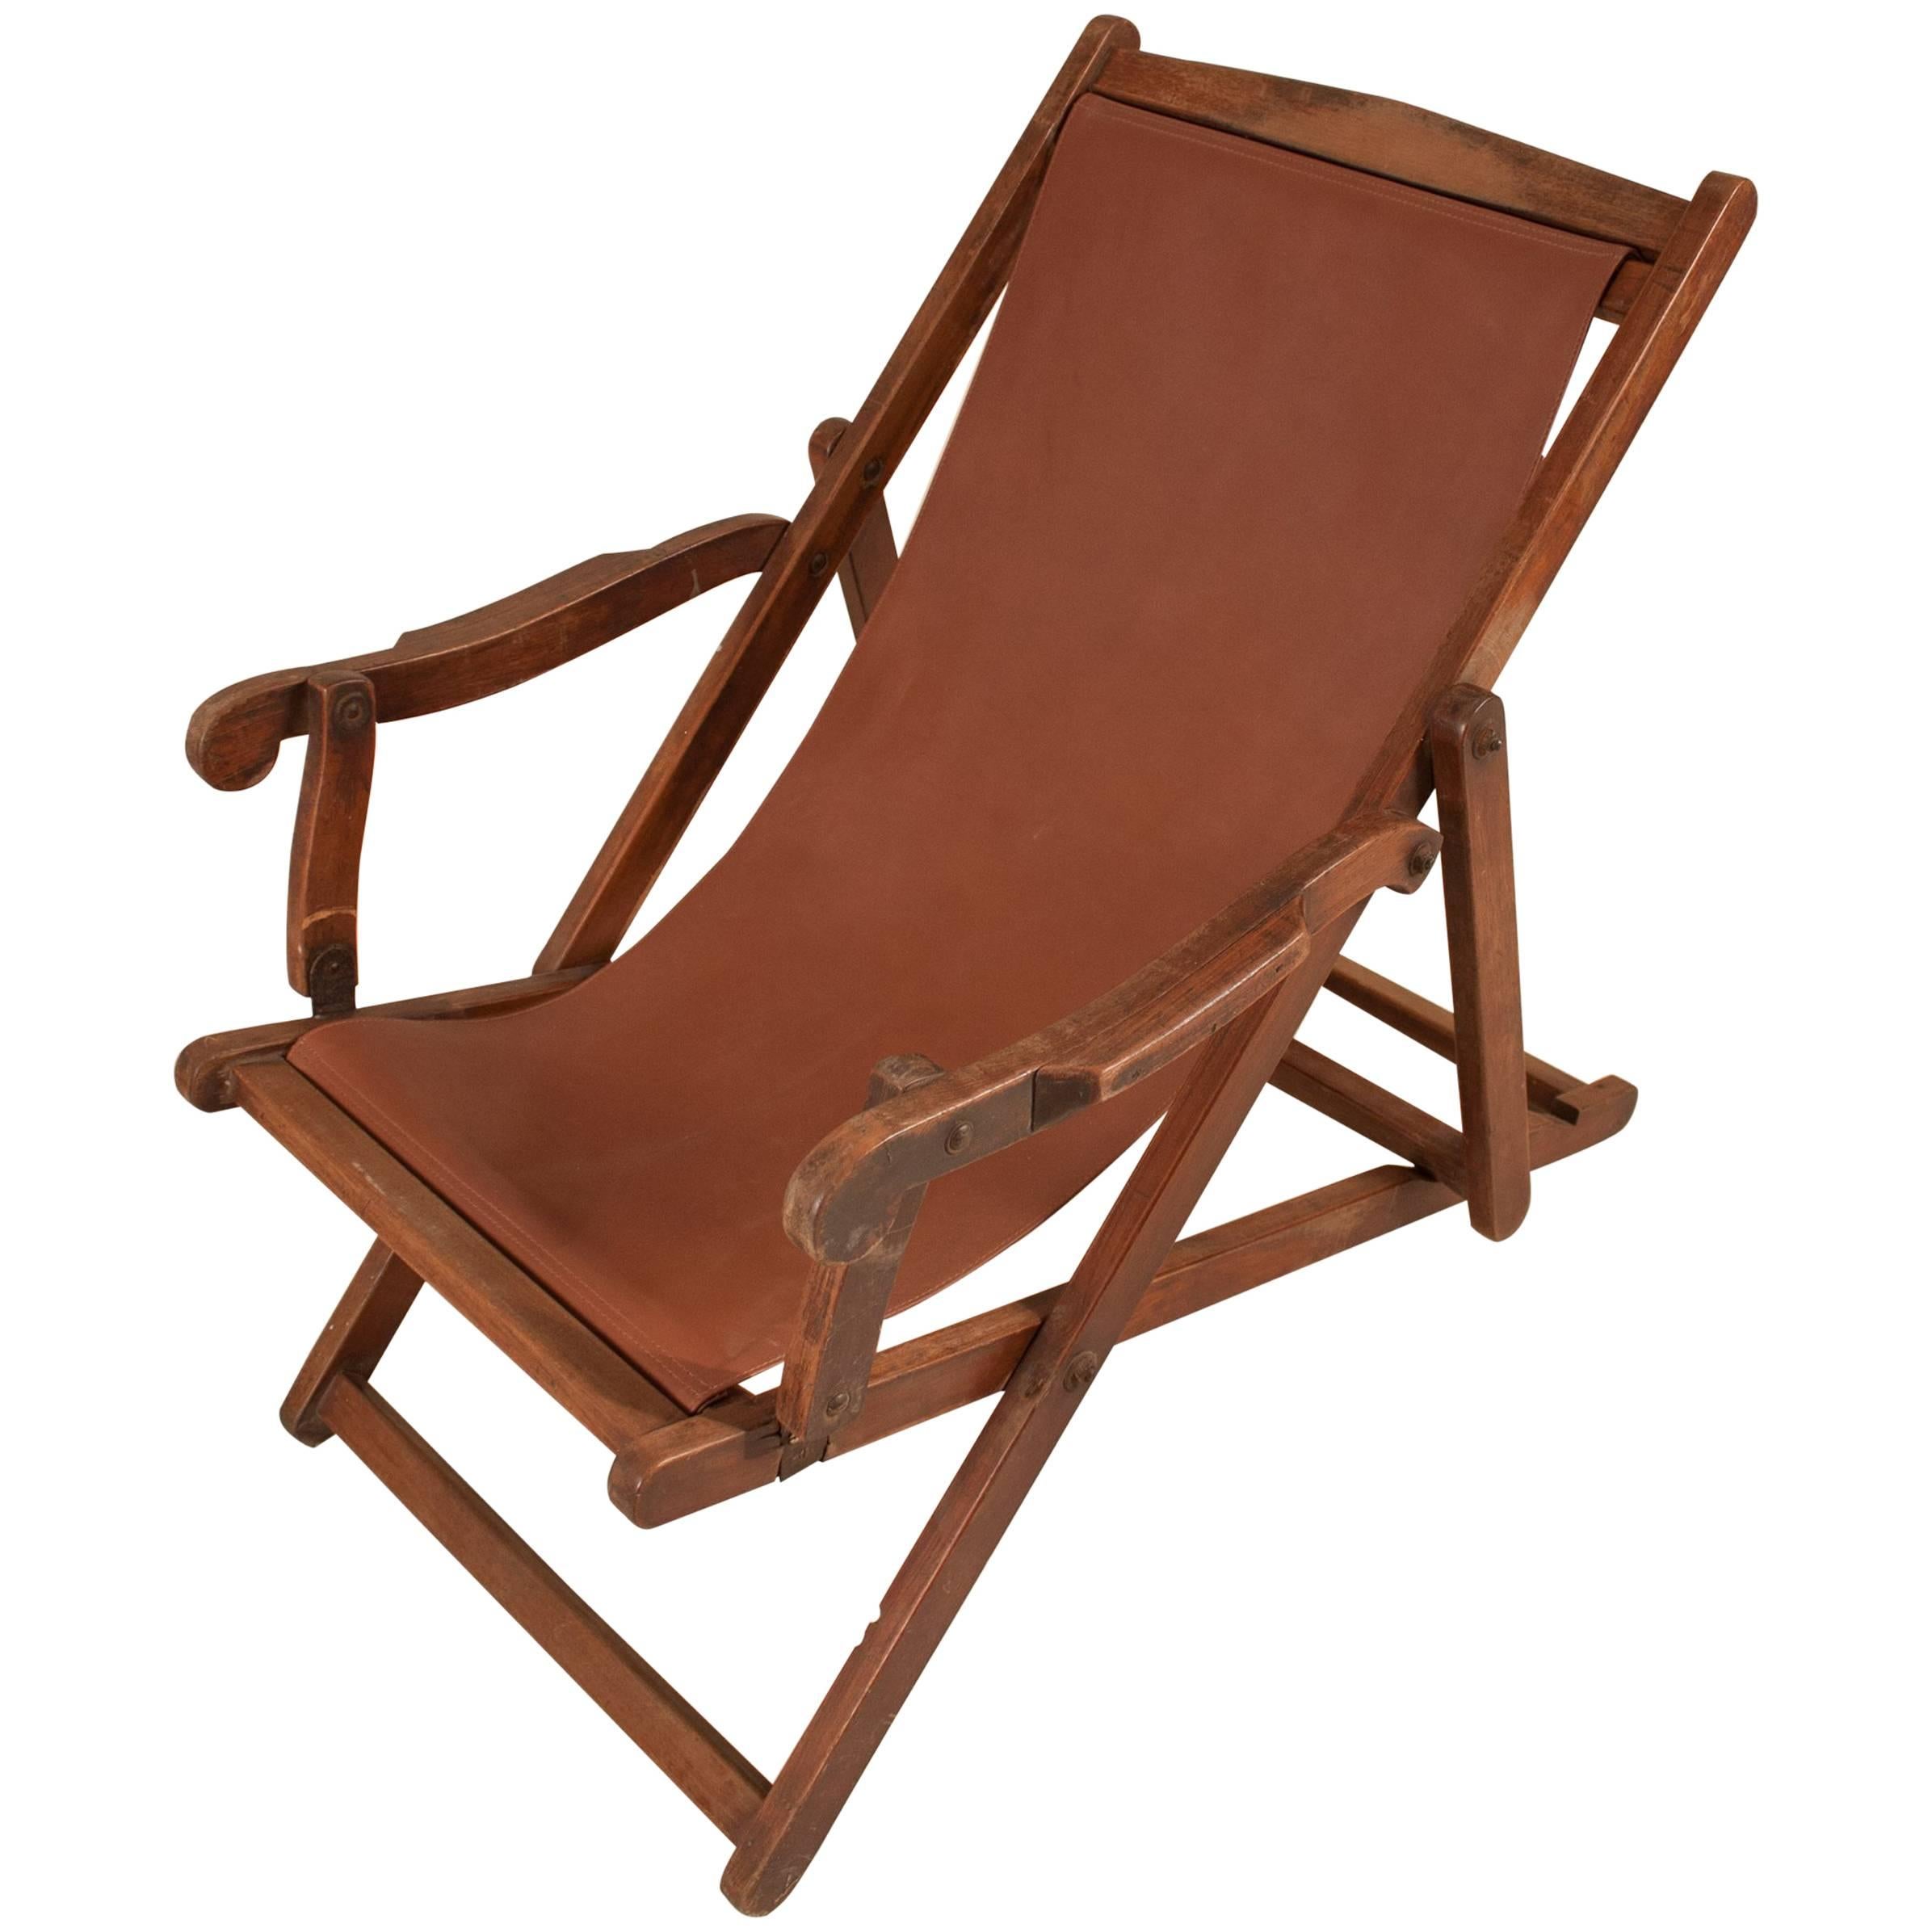 British Campaign Sling Lounge Chair